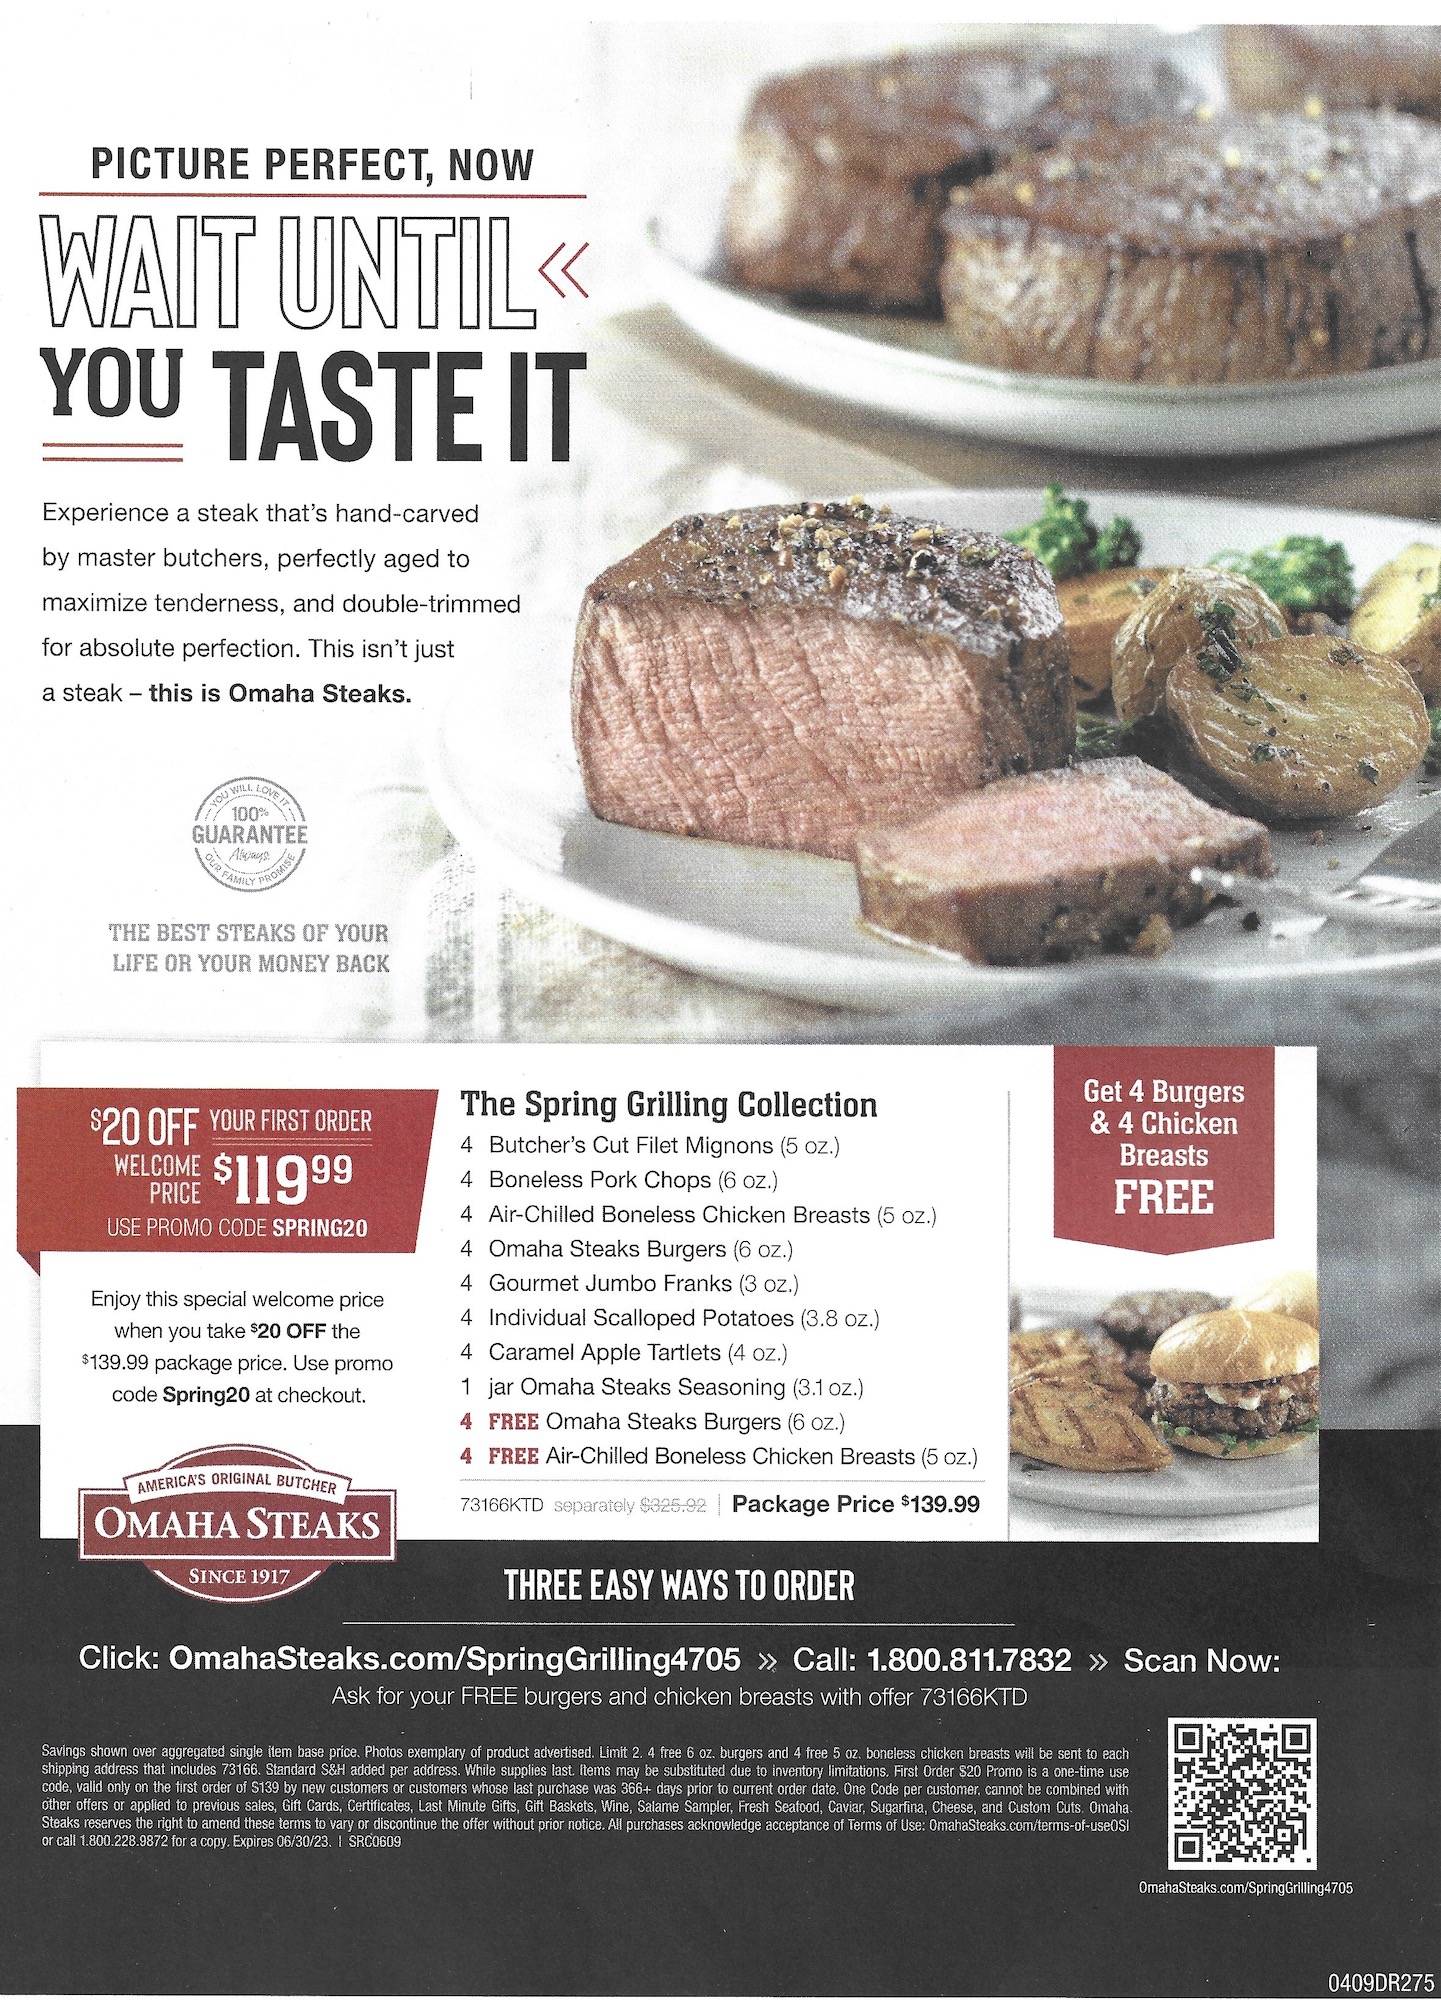 $20 Off First Order + 4 Free Burgers 4 Free Chicken Breasts | Omaha Steaks